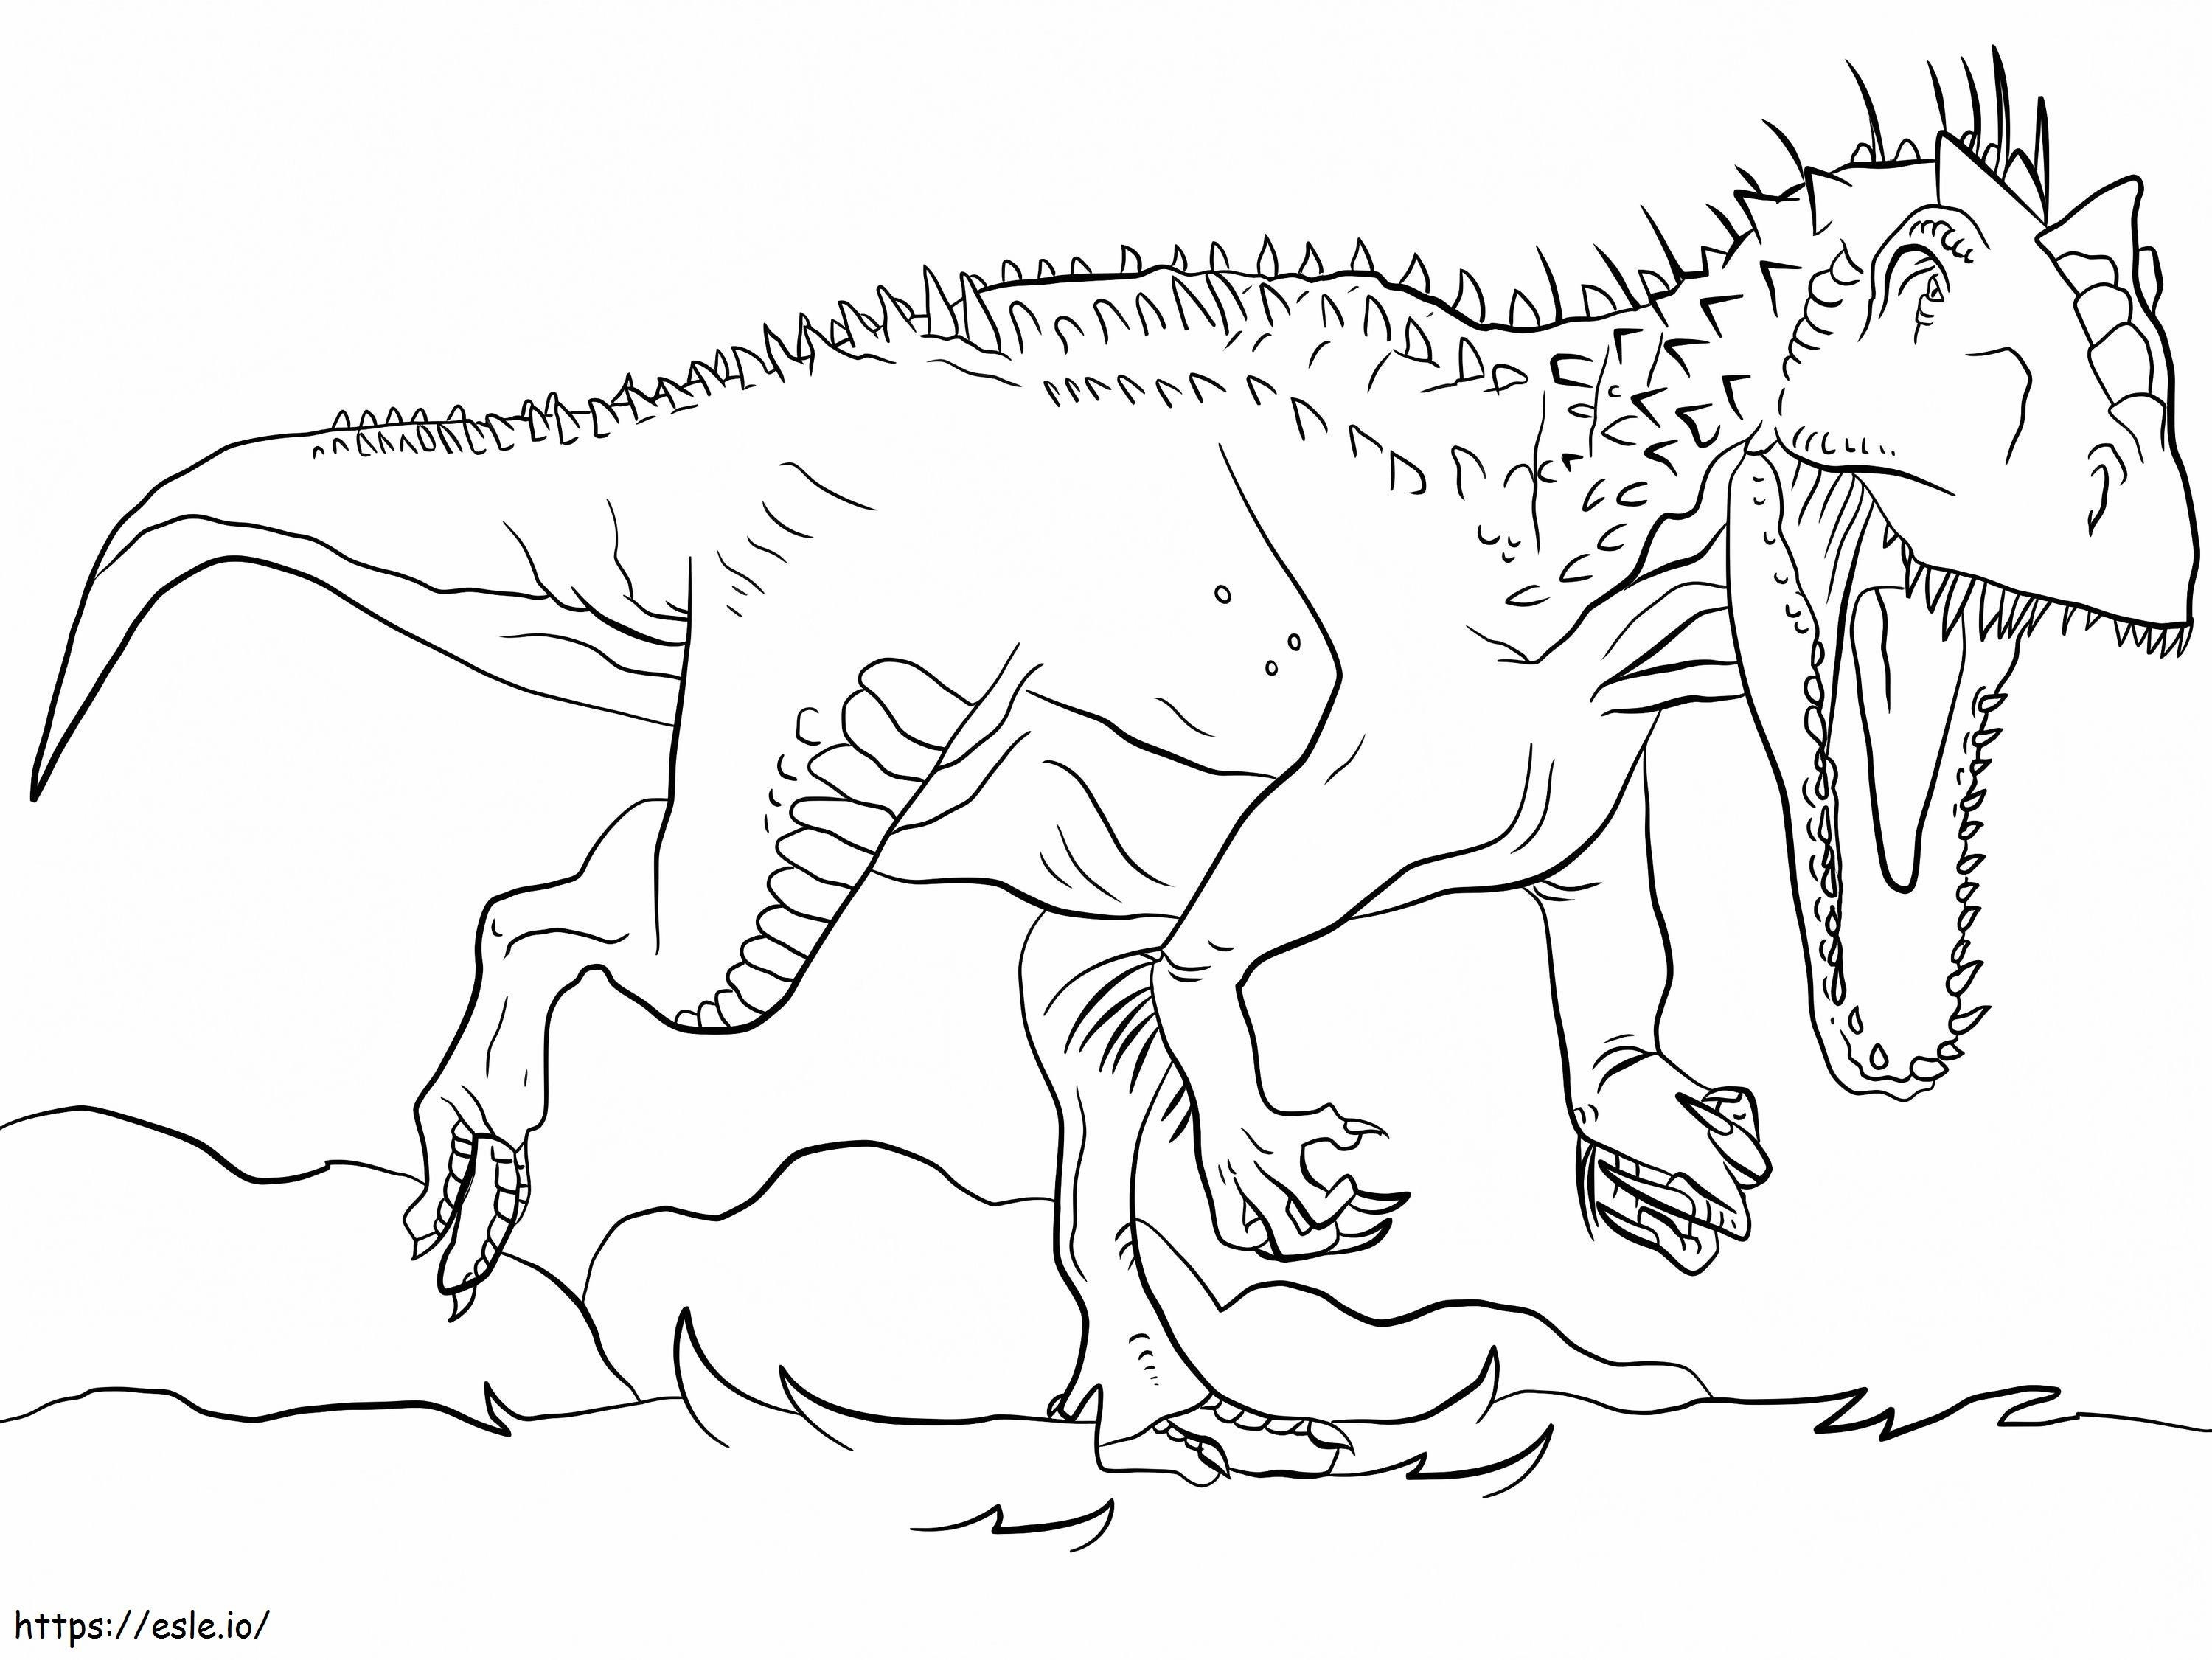 Indominus King coloring page